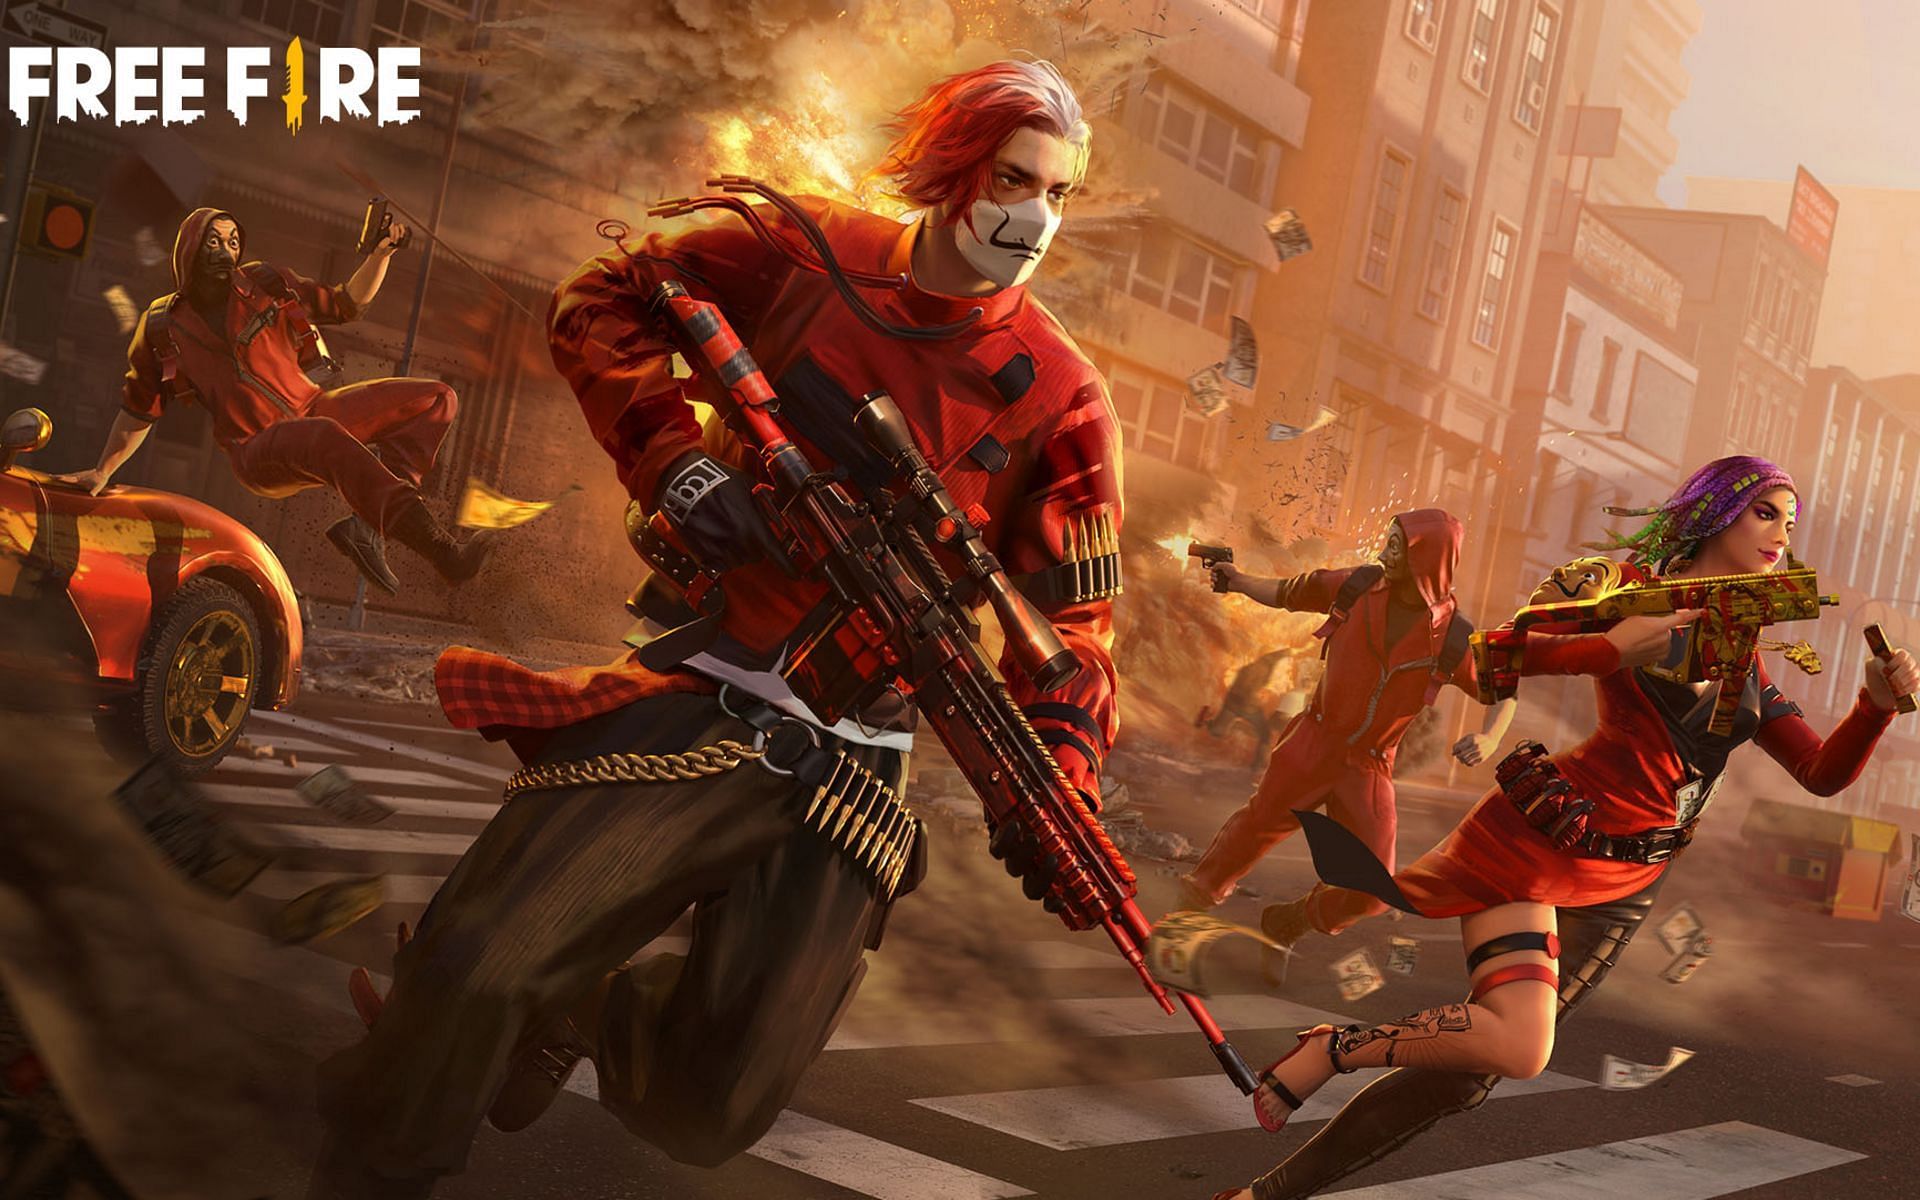 A look at Garena Free Fire alternatives